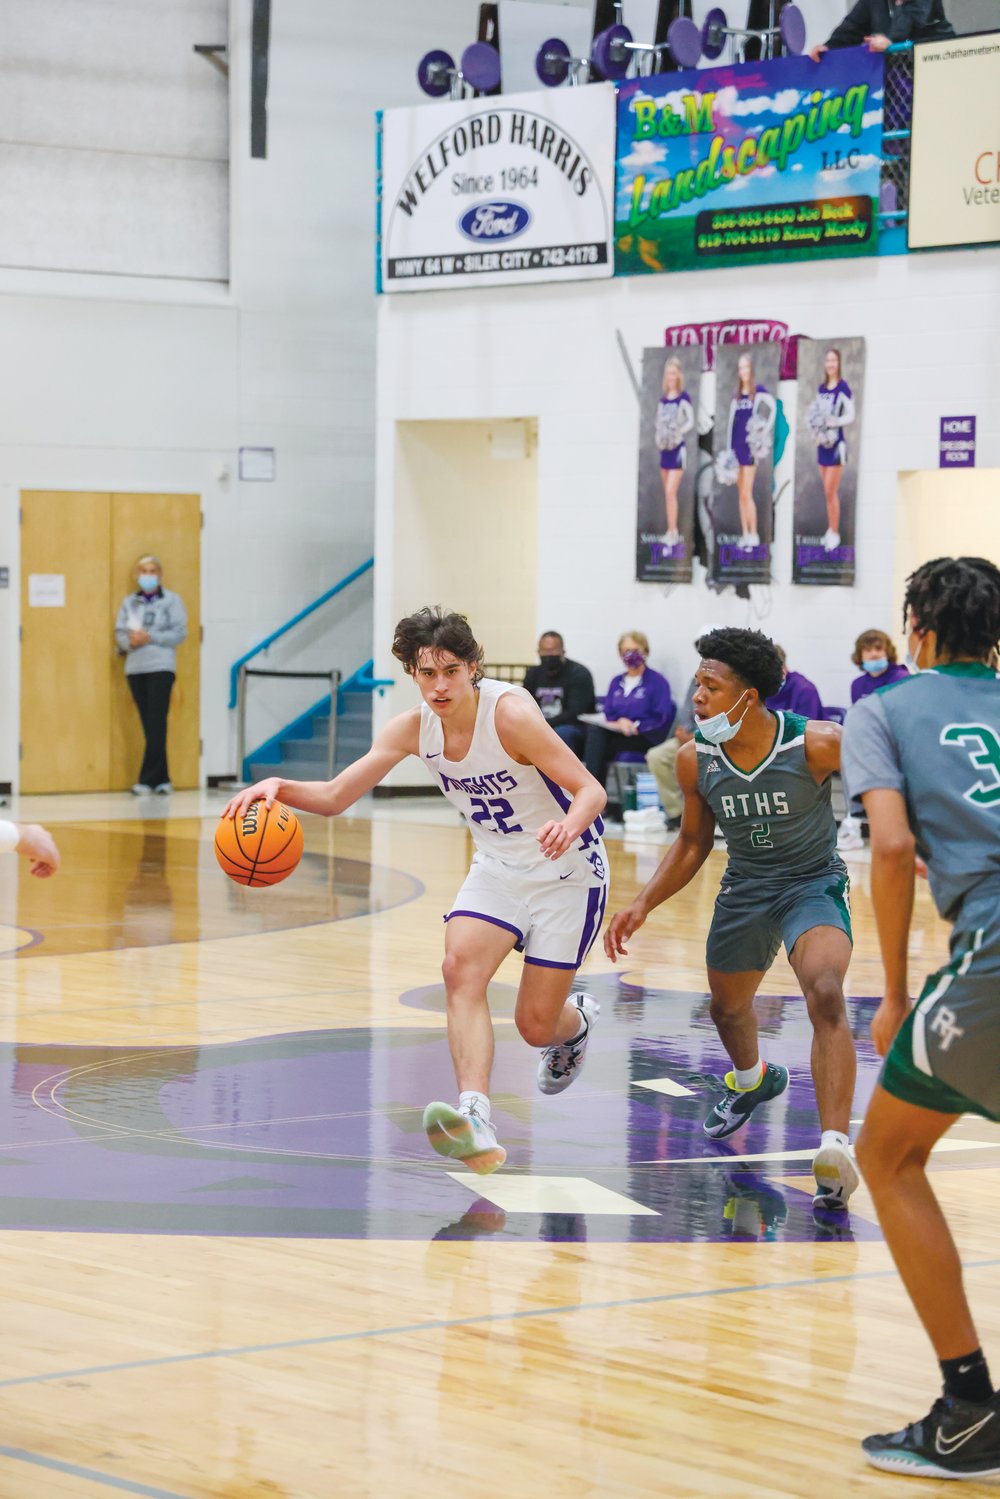 Chatham Charter freshman Beau Harvey (22) works to break the infamous Research Triangle trap defense in the Knights' 60-59 win over the Raptors in the championship game of the 2021 Chatham Charter Winter Slam last Wednesday. Harvey was named the tournament's Most Outstanding Player.